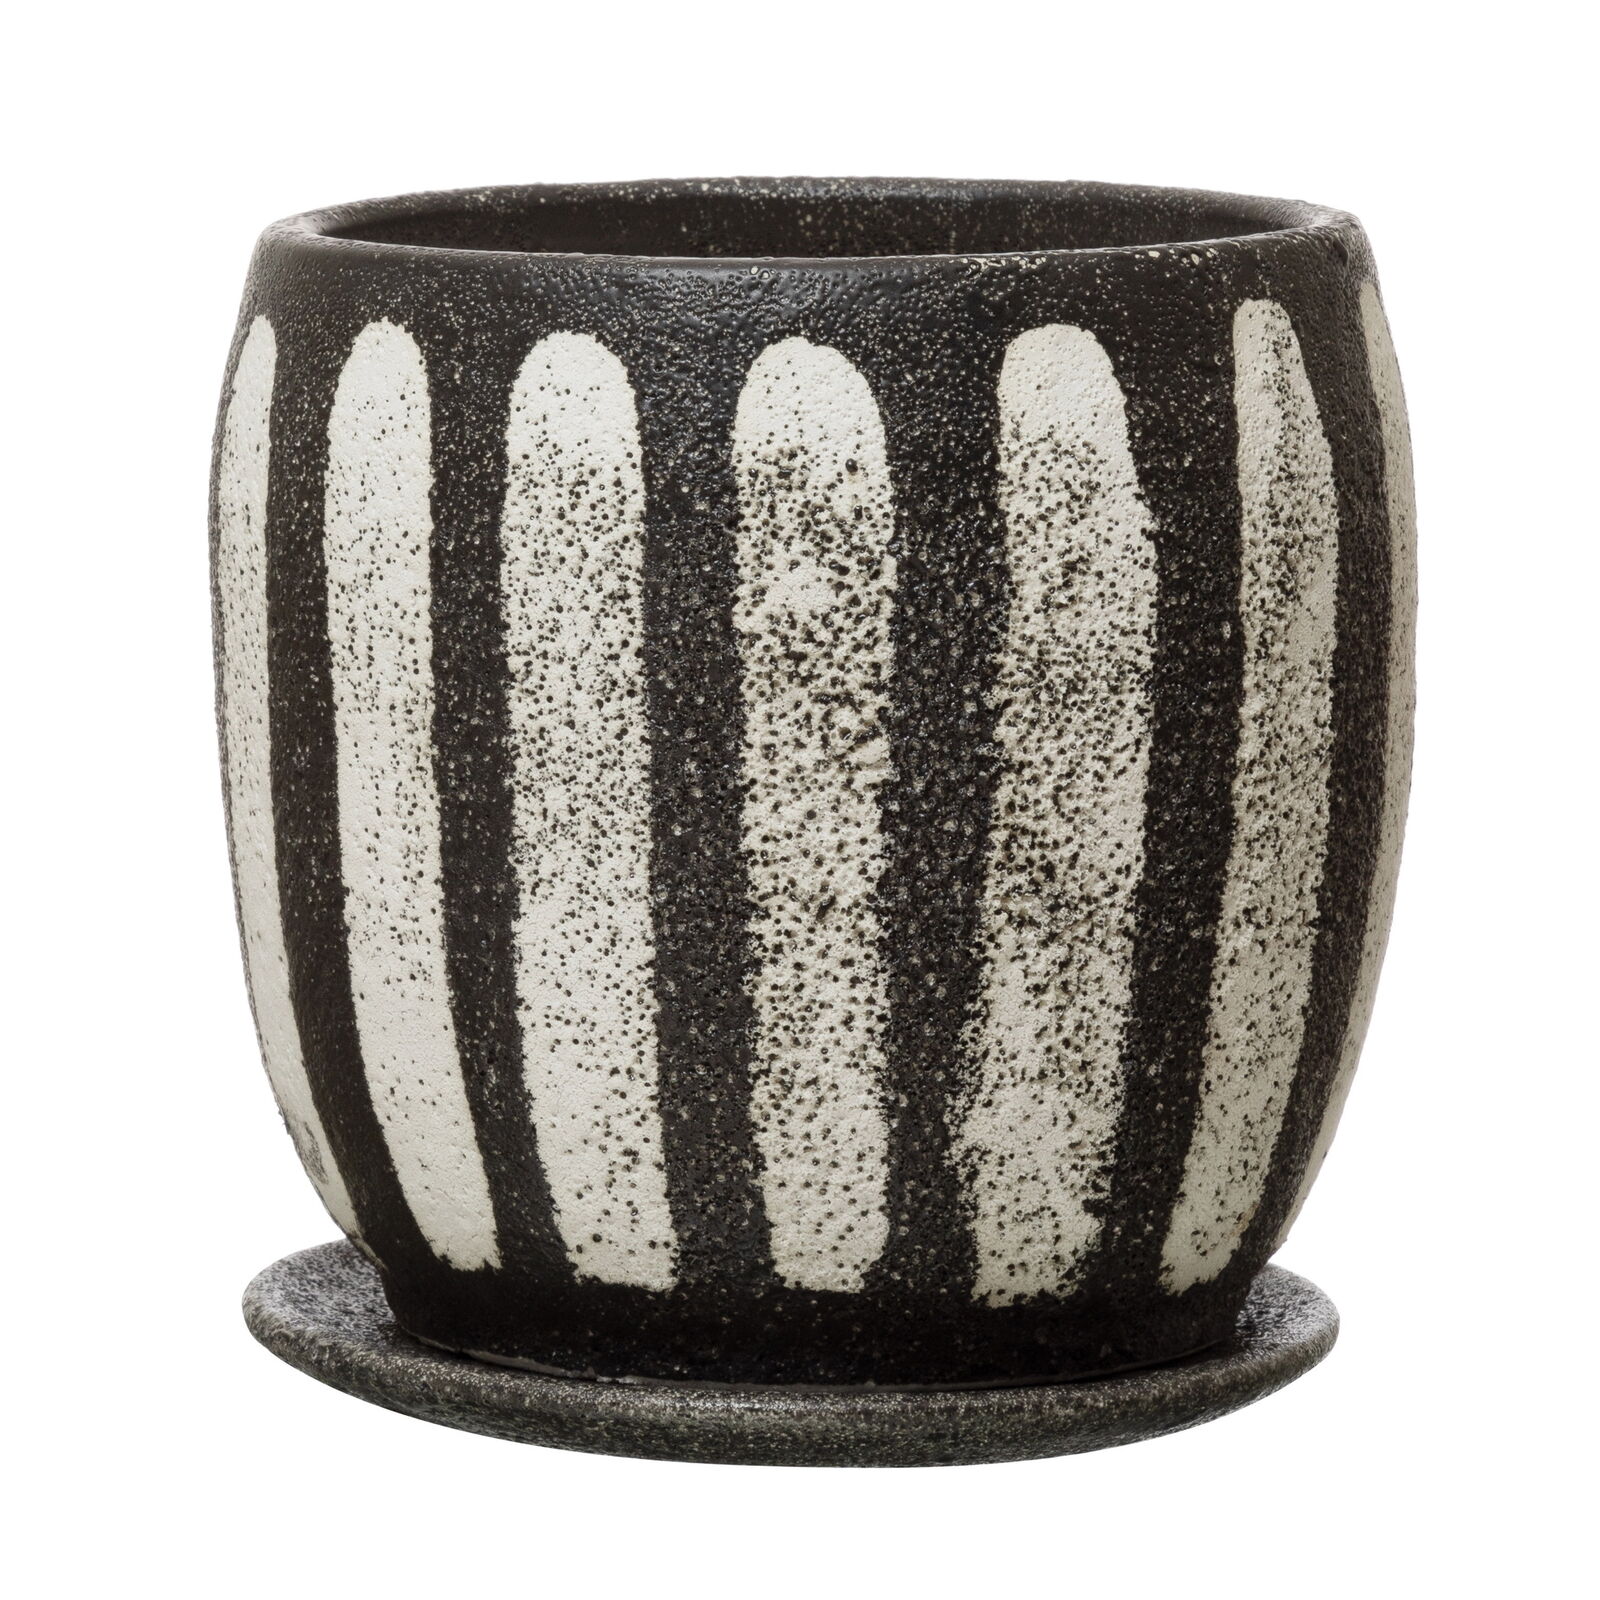 Hand-Painted Terra-cotta Planter with Saucer Black & White, Set of 2 